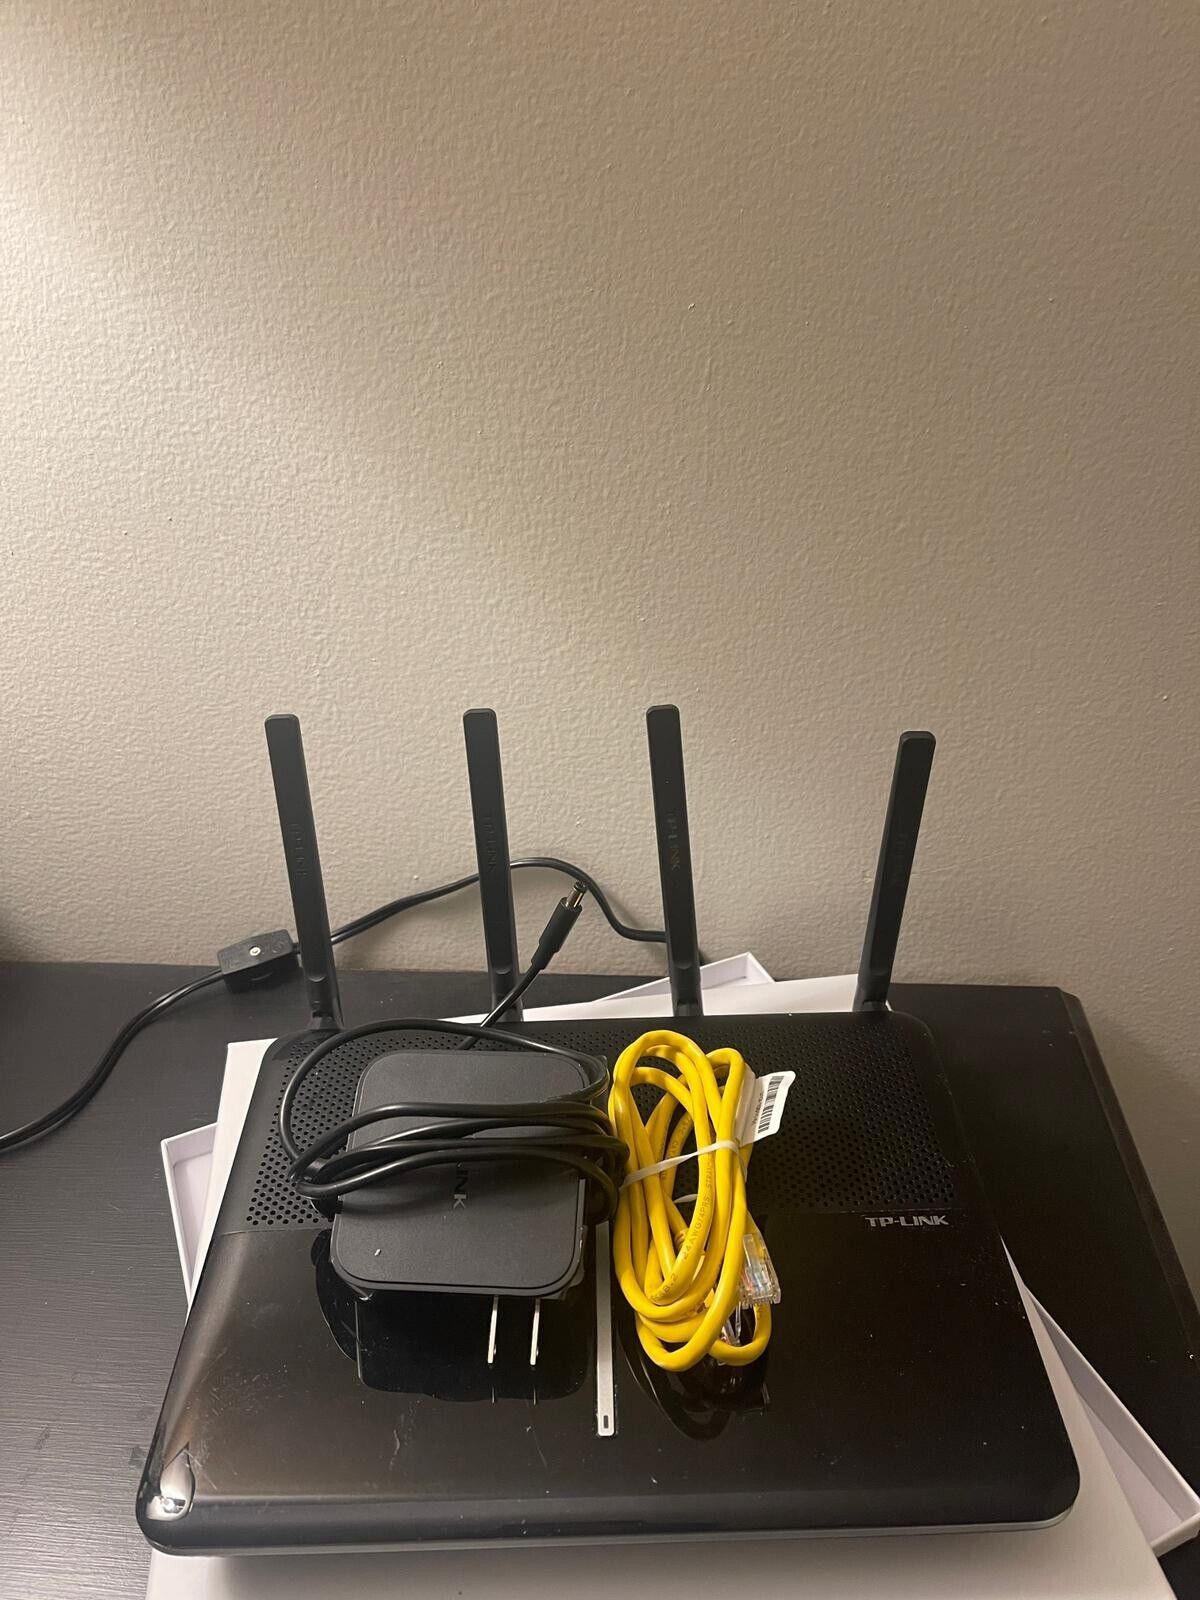 TP-LINK AC2600 Wireless Dual Band Gigabit Router Archer C2600 & Power Cord Works